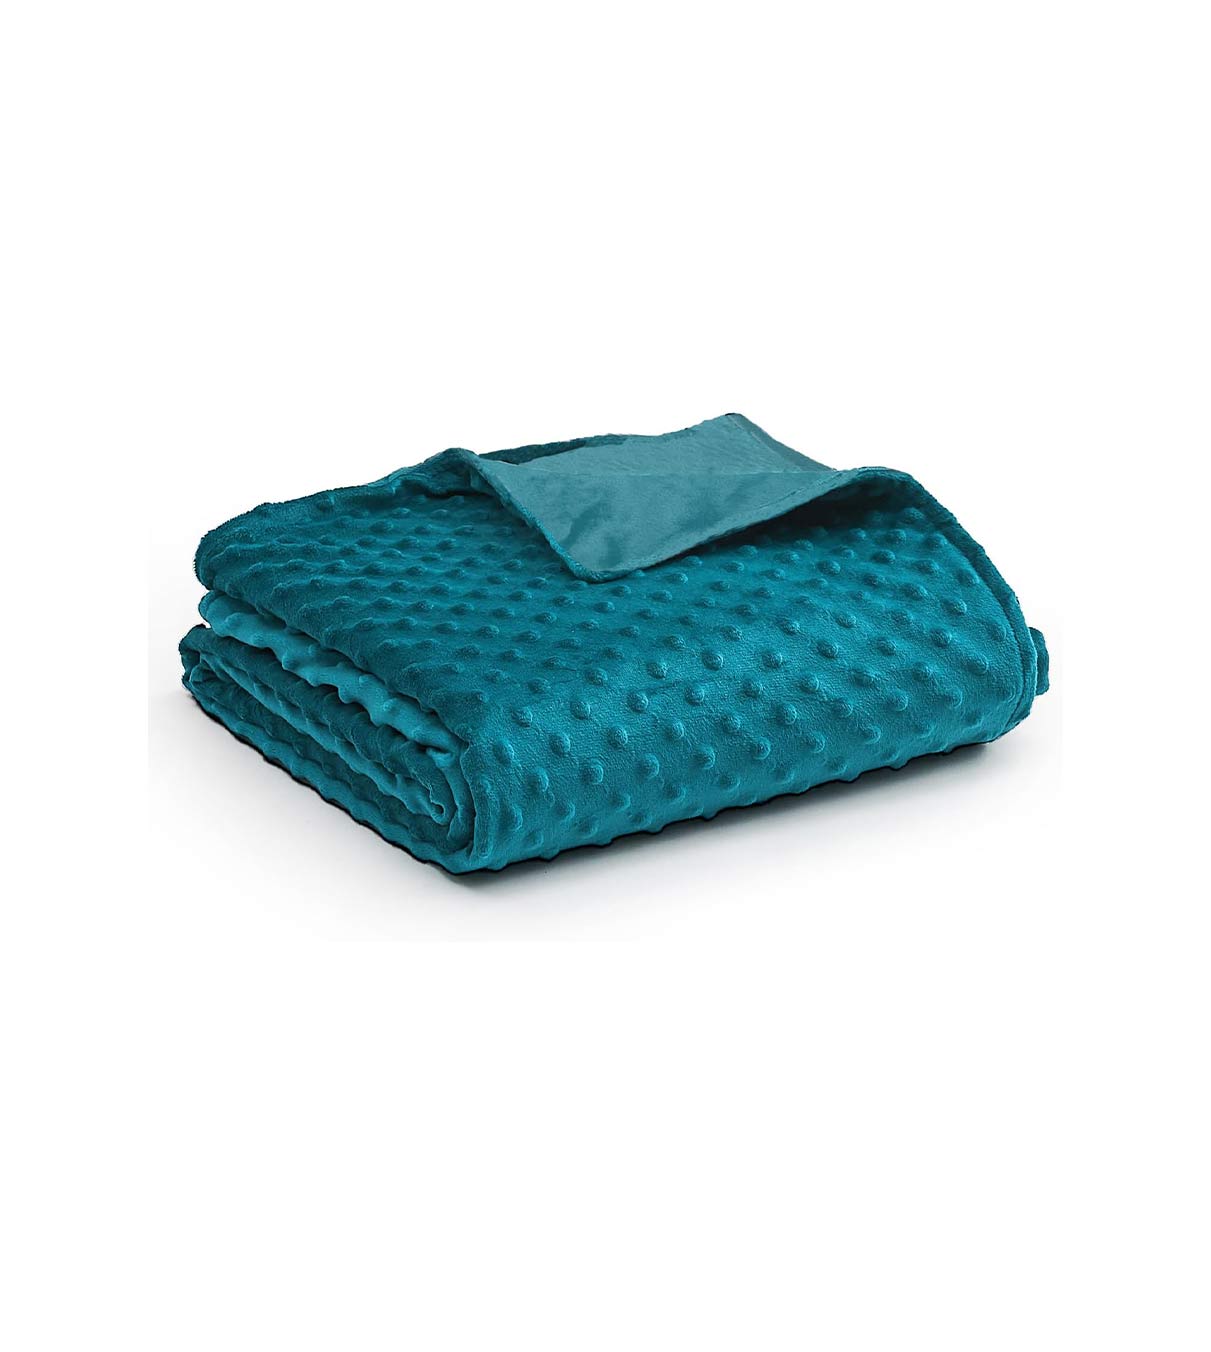 Product: Soft Weighted Blanket Duvet Cover | Color: Minky Green